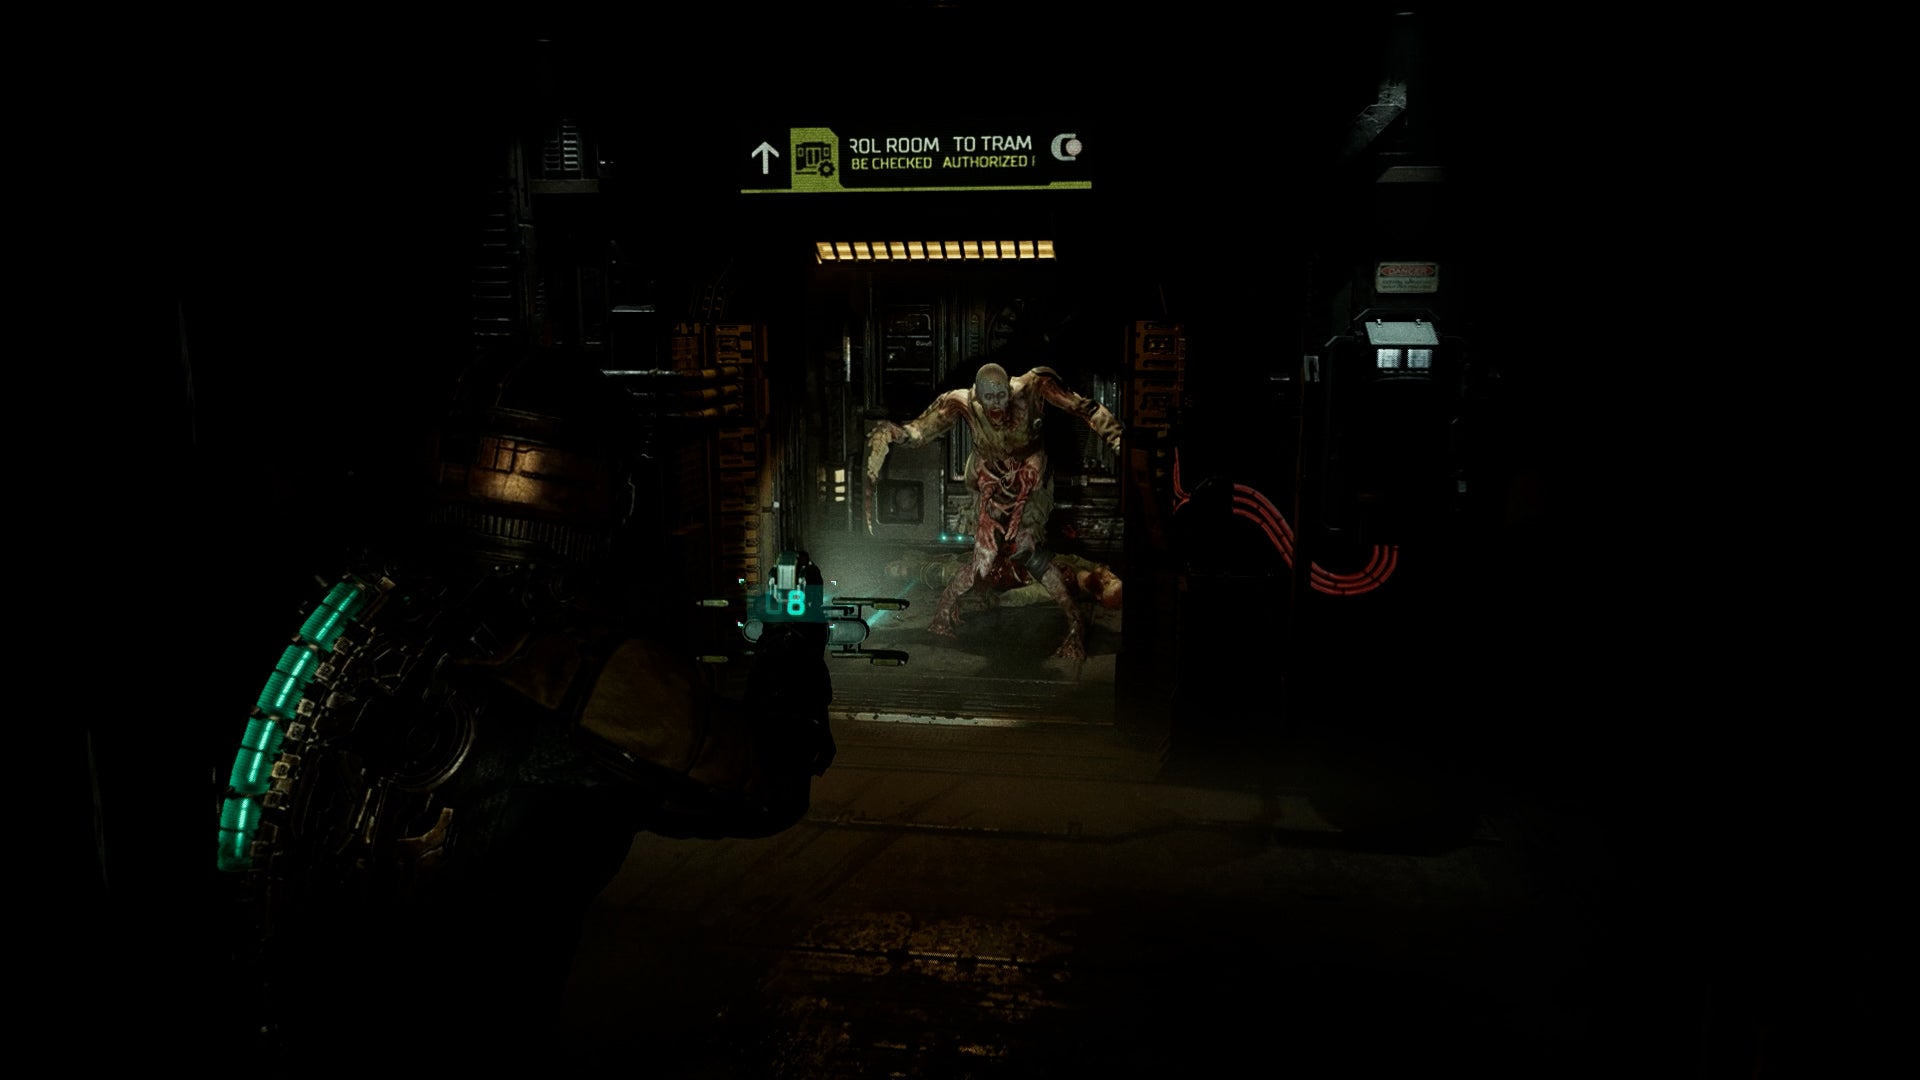 Isaac points his plasma cutter at a necromorph in Dead Space